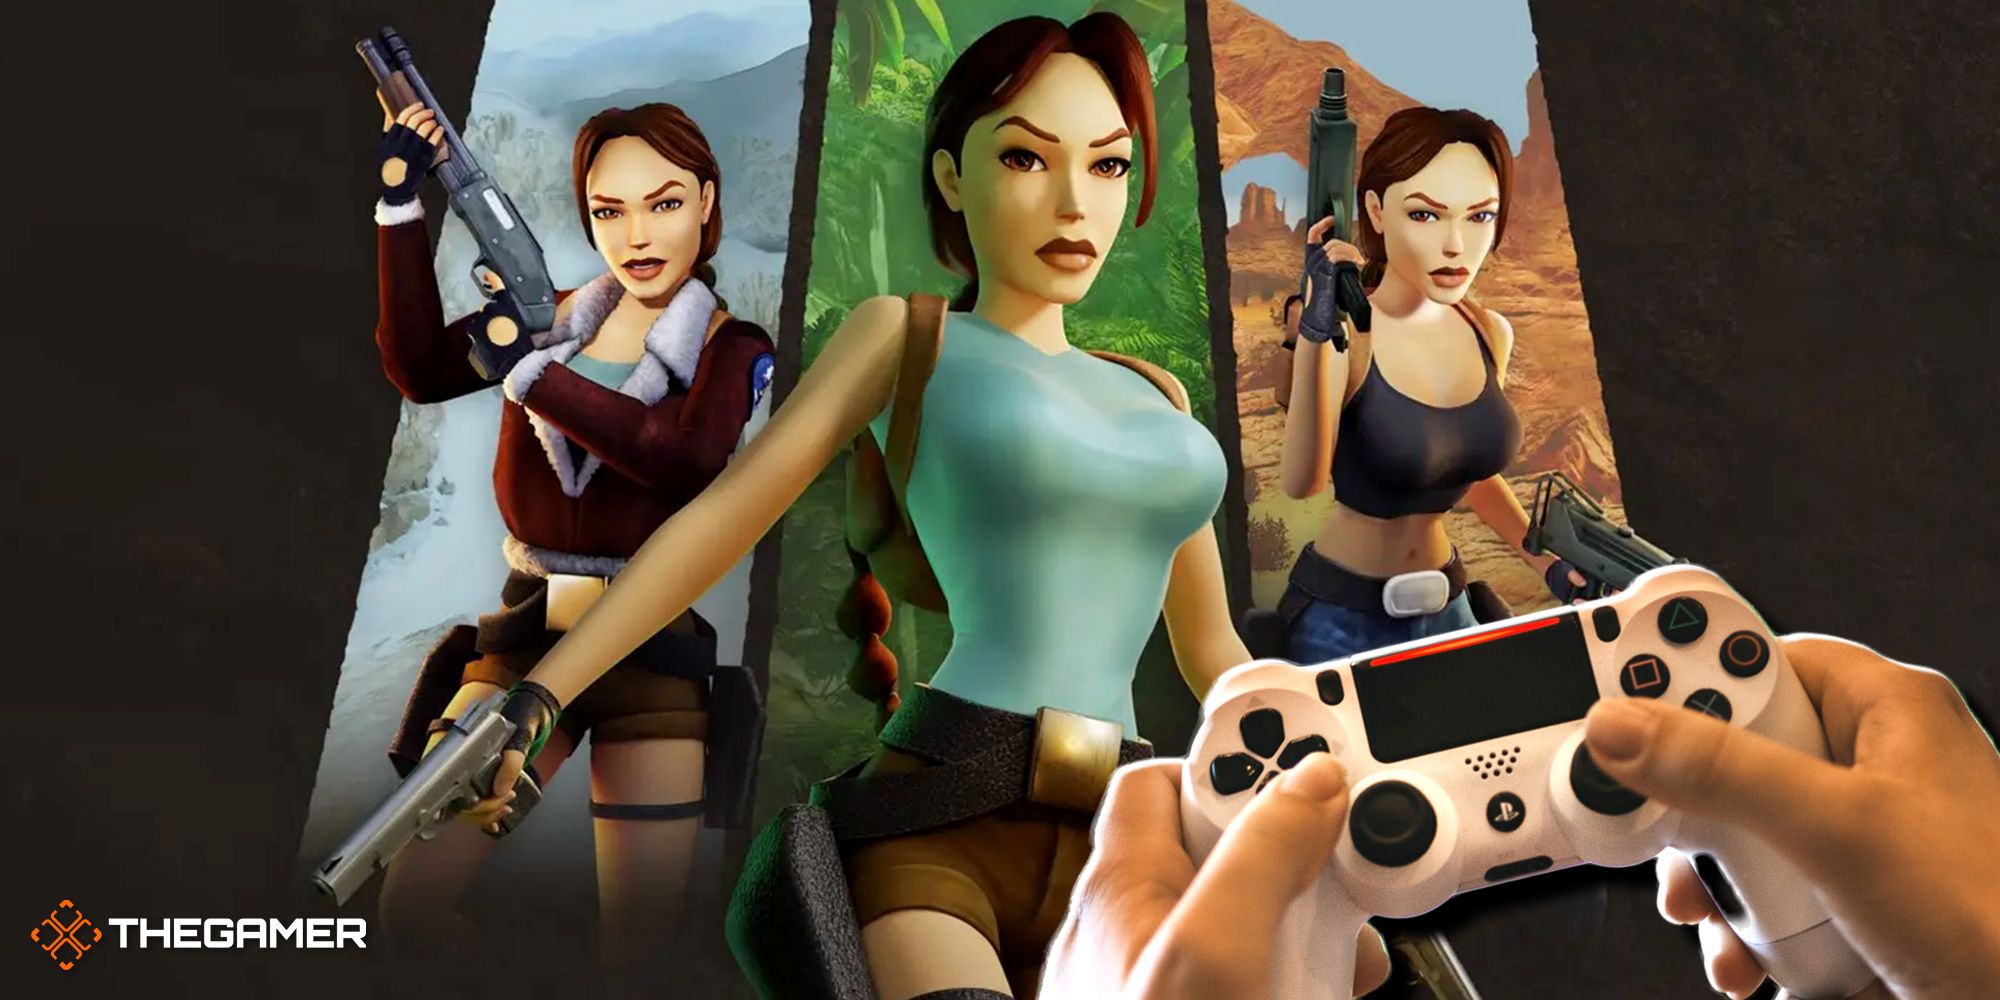 Tomb Raider Remastered Just Won't Be The Same With Modern Controls